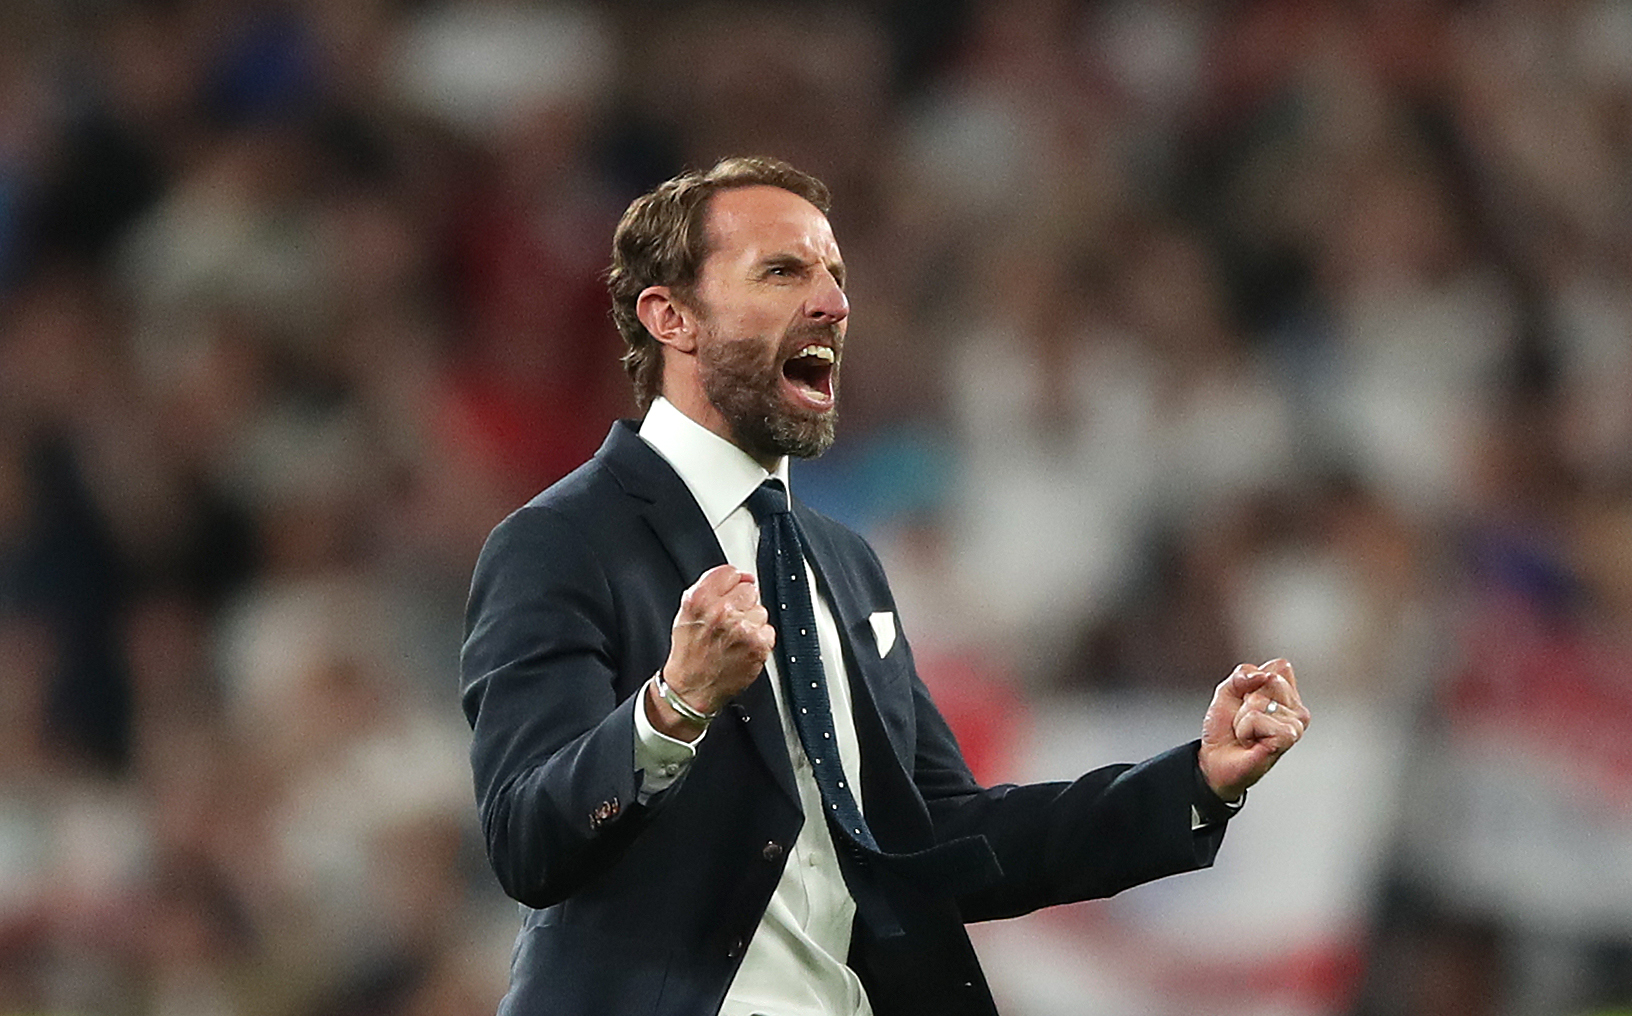 Gareth Southgate led England to the final of the last European Championship